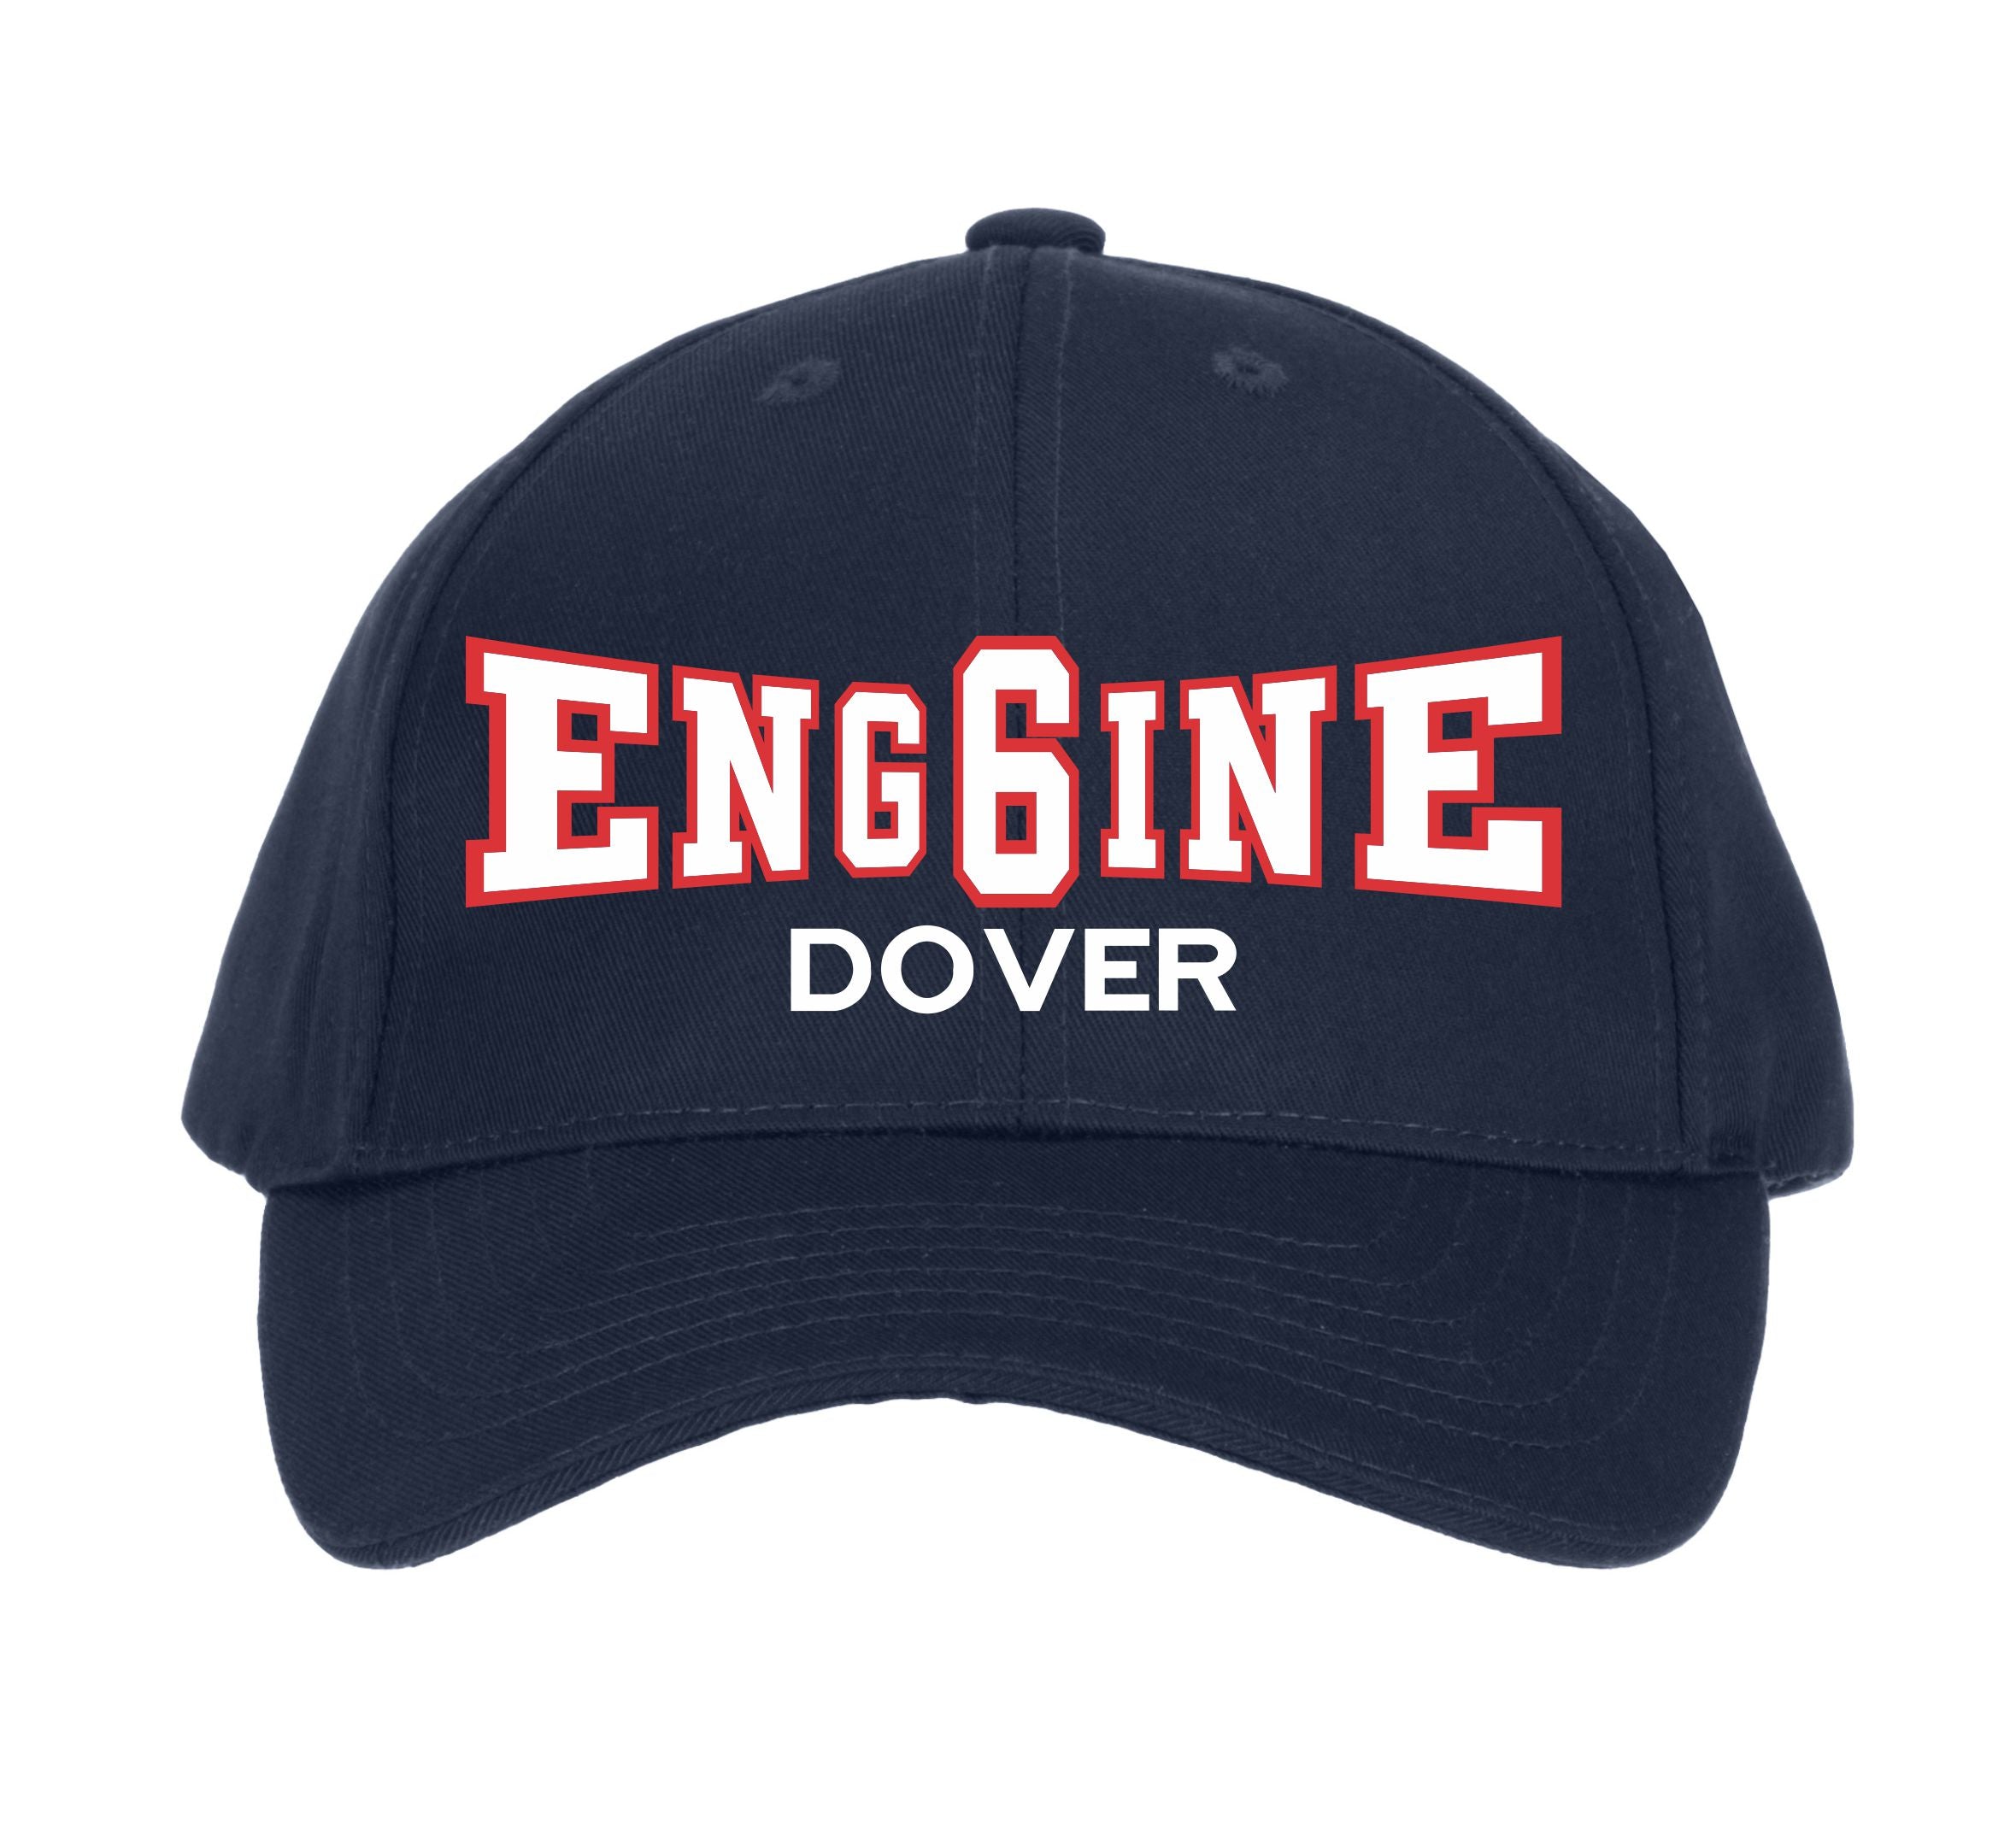 ENG6INE Dover Custom Embroidered Hat